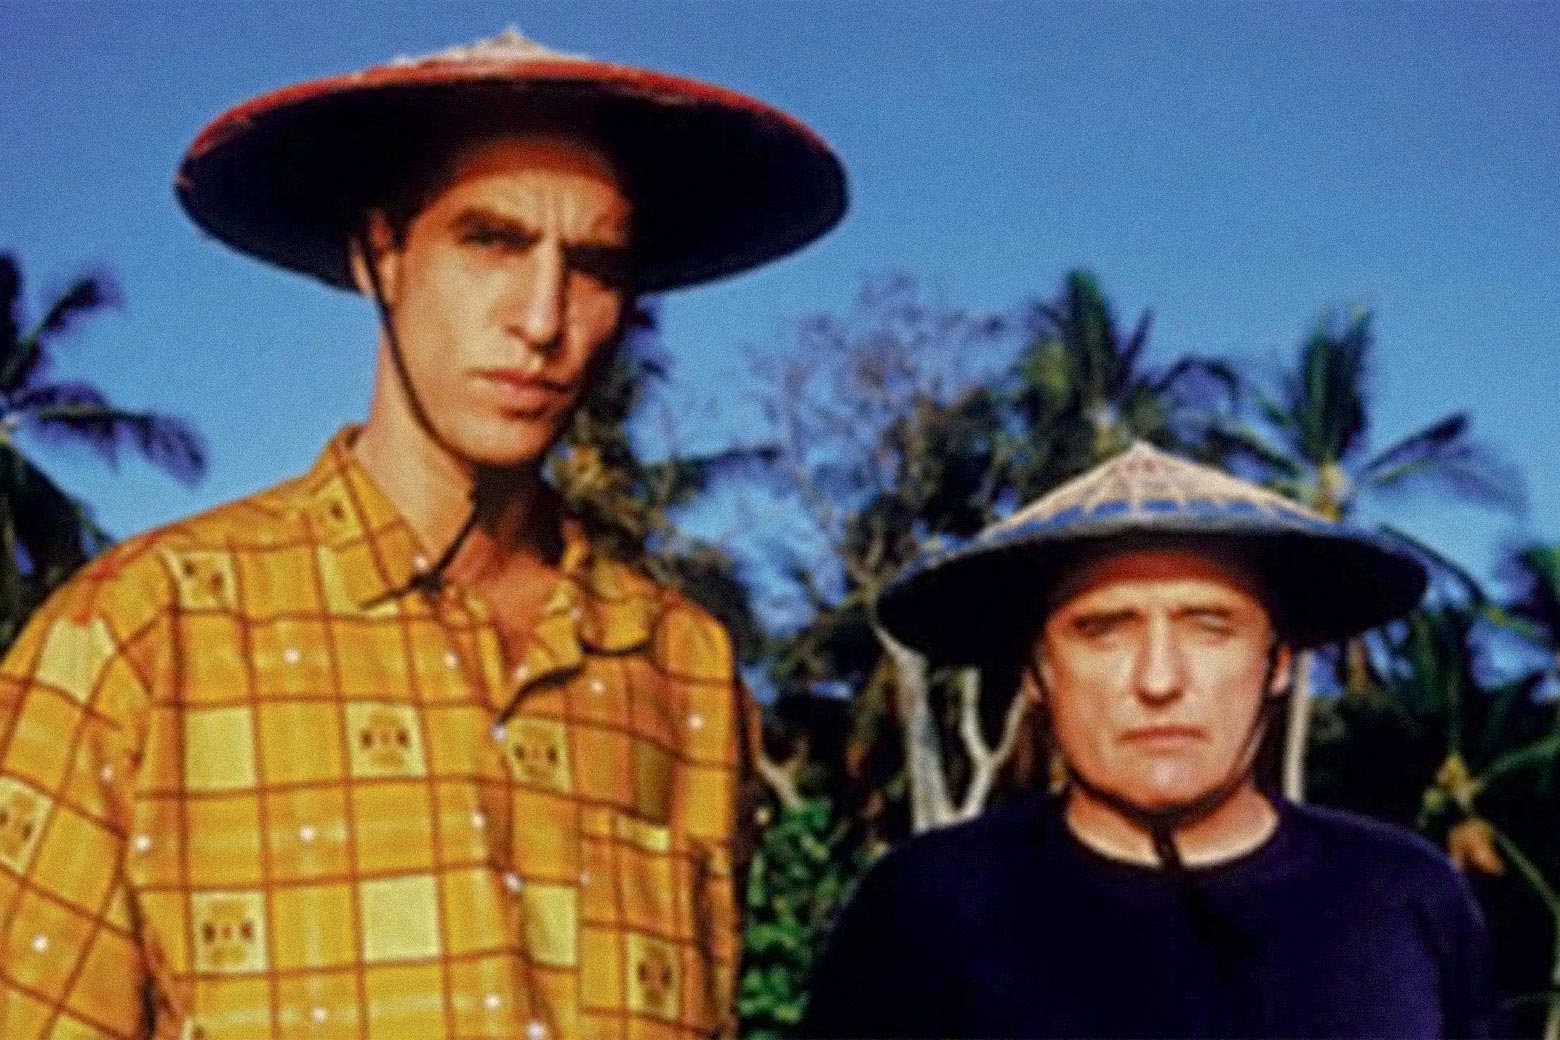 Before Painting With John, John Lurie was fake-hunting giant squid